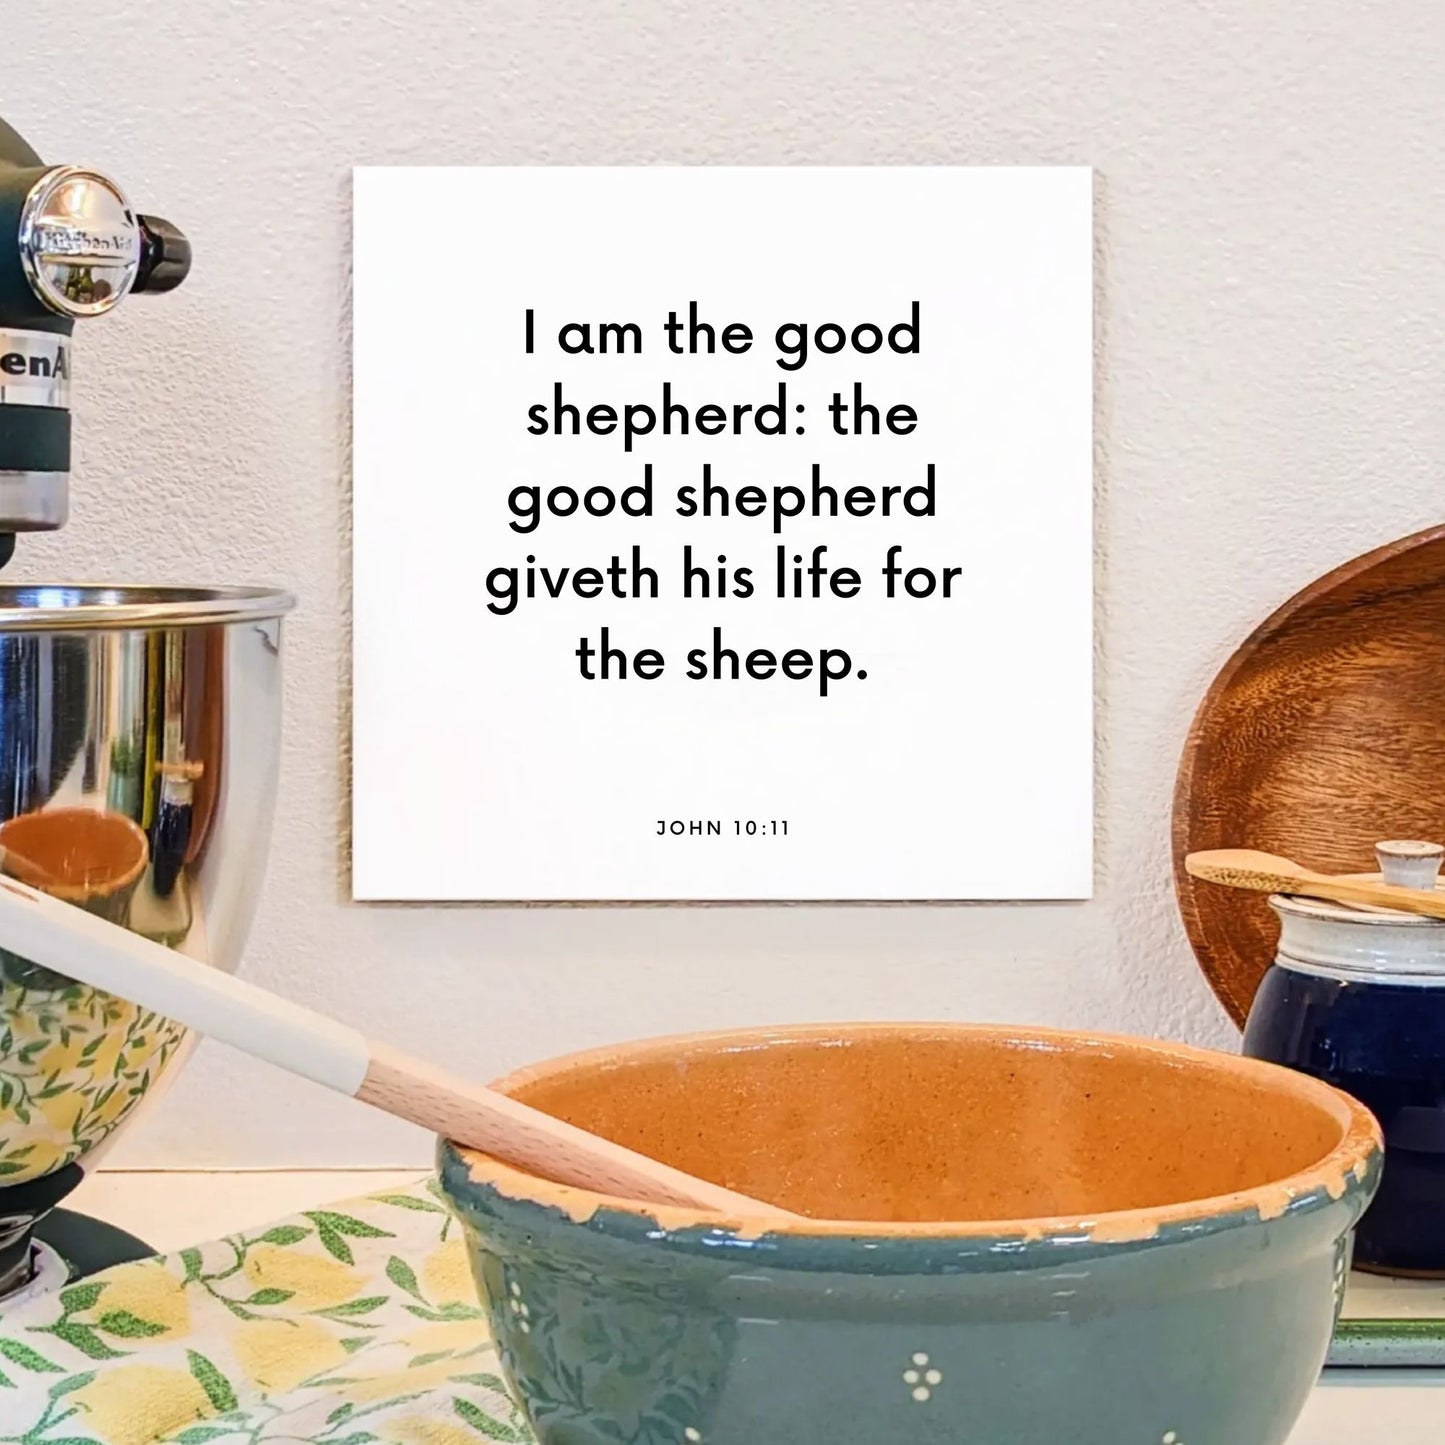 Kitchen mouting of the scripture tile for John 10:11 - "The good shepherd giveth his life for the sheep"